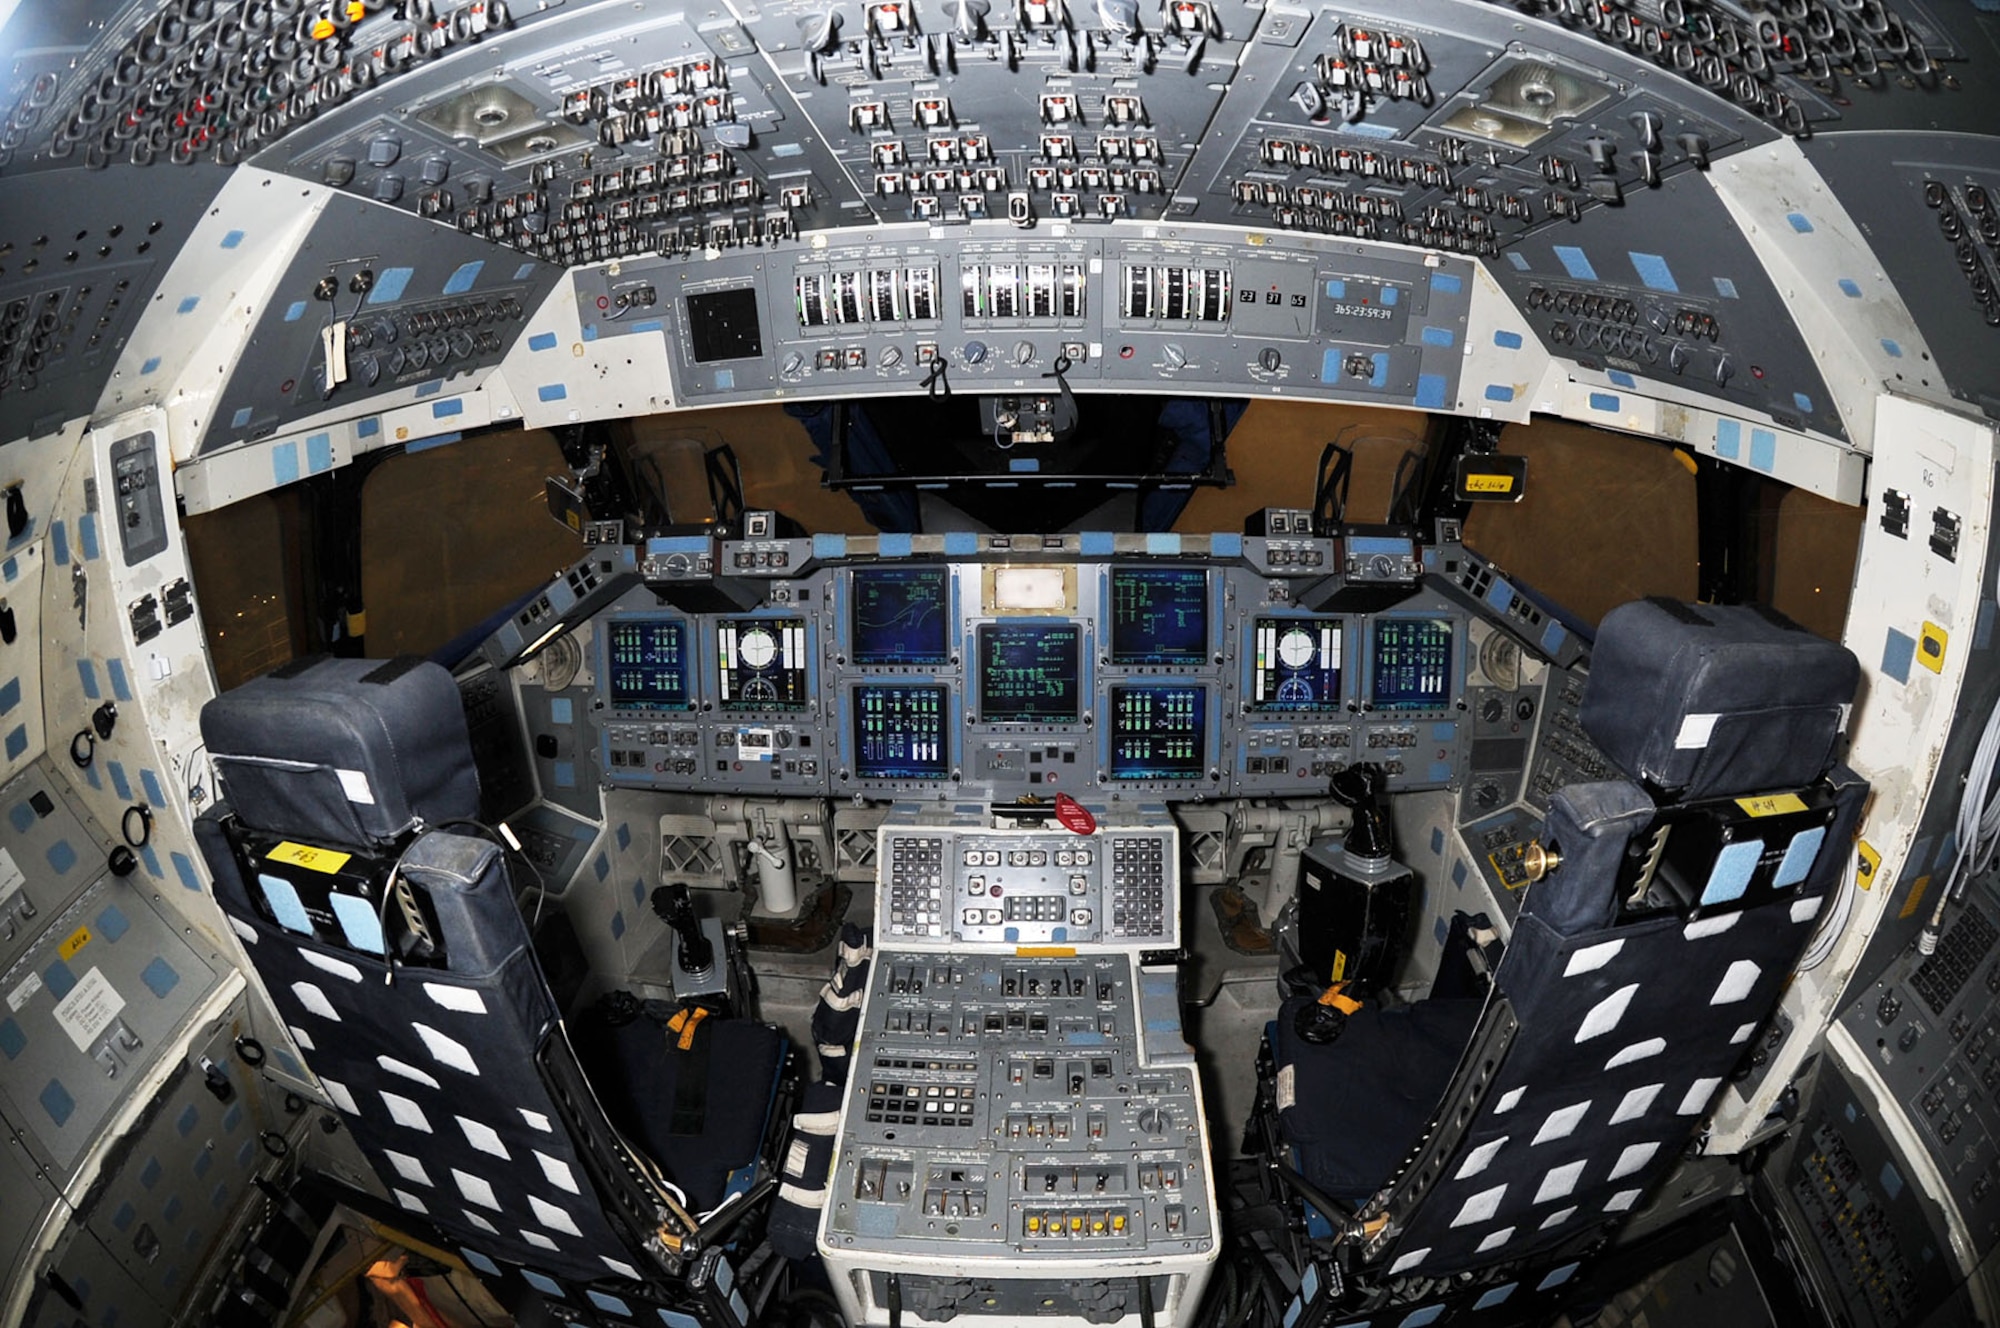 DAYTON, Ohio -- Flight deck of the Crew Compartment Trainer (CCT-1) at the National Museum of the U.S. Air Force. (U.S. Air Force photo by Jeff Fisher)